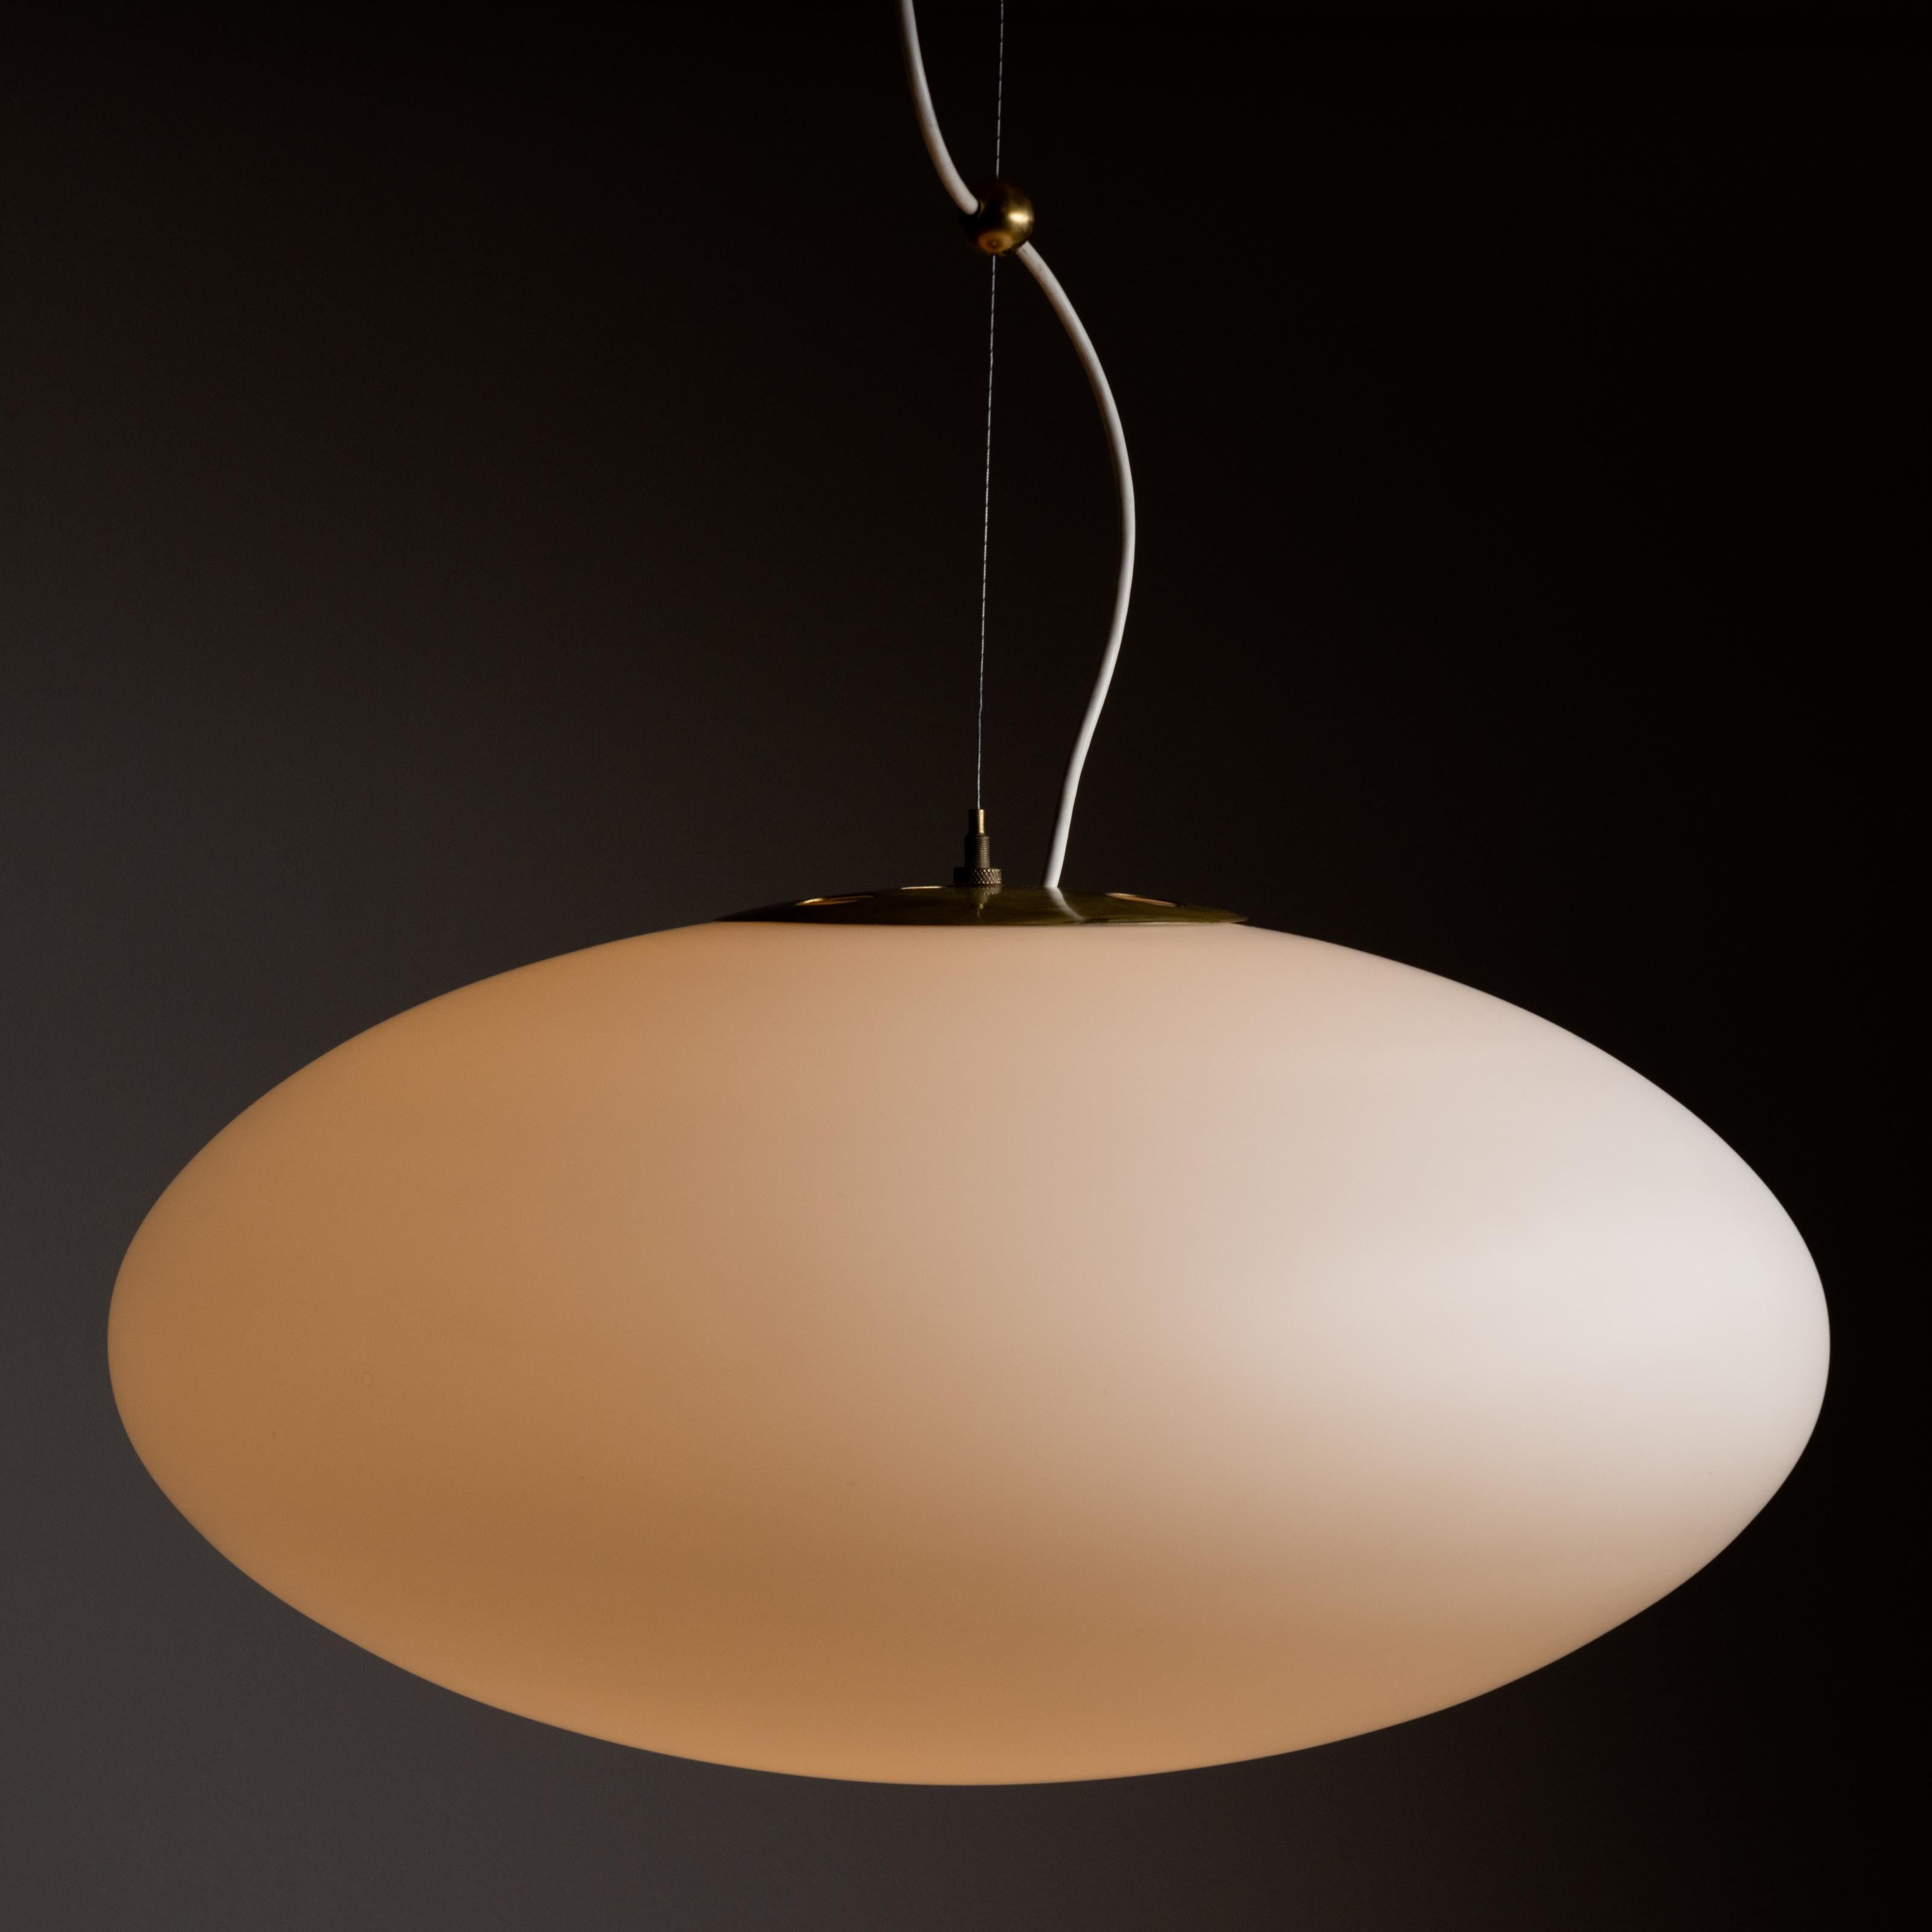 Model 1187 ceiling lamp by Gaetano Sciolari for Stilnovo. Designed and manufactured in Italy, 1953. Ceiling mounted by a cylindrical brass canopy, wire length is slightly adjustable with wire pulley detail. Opal glass lantern provides soft and